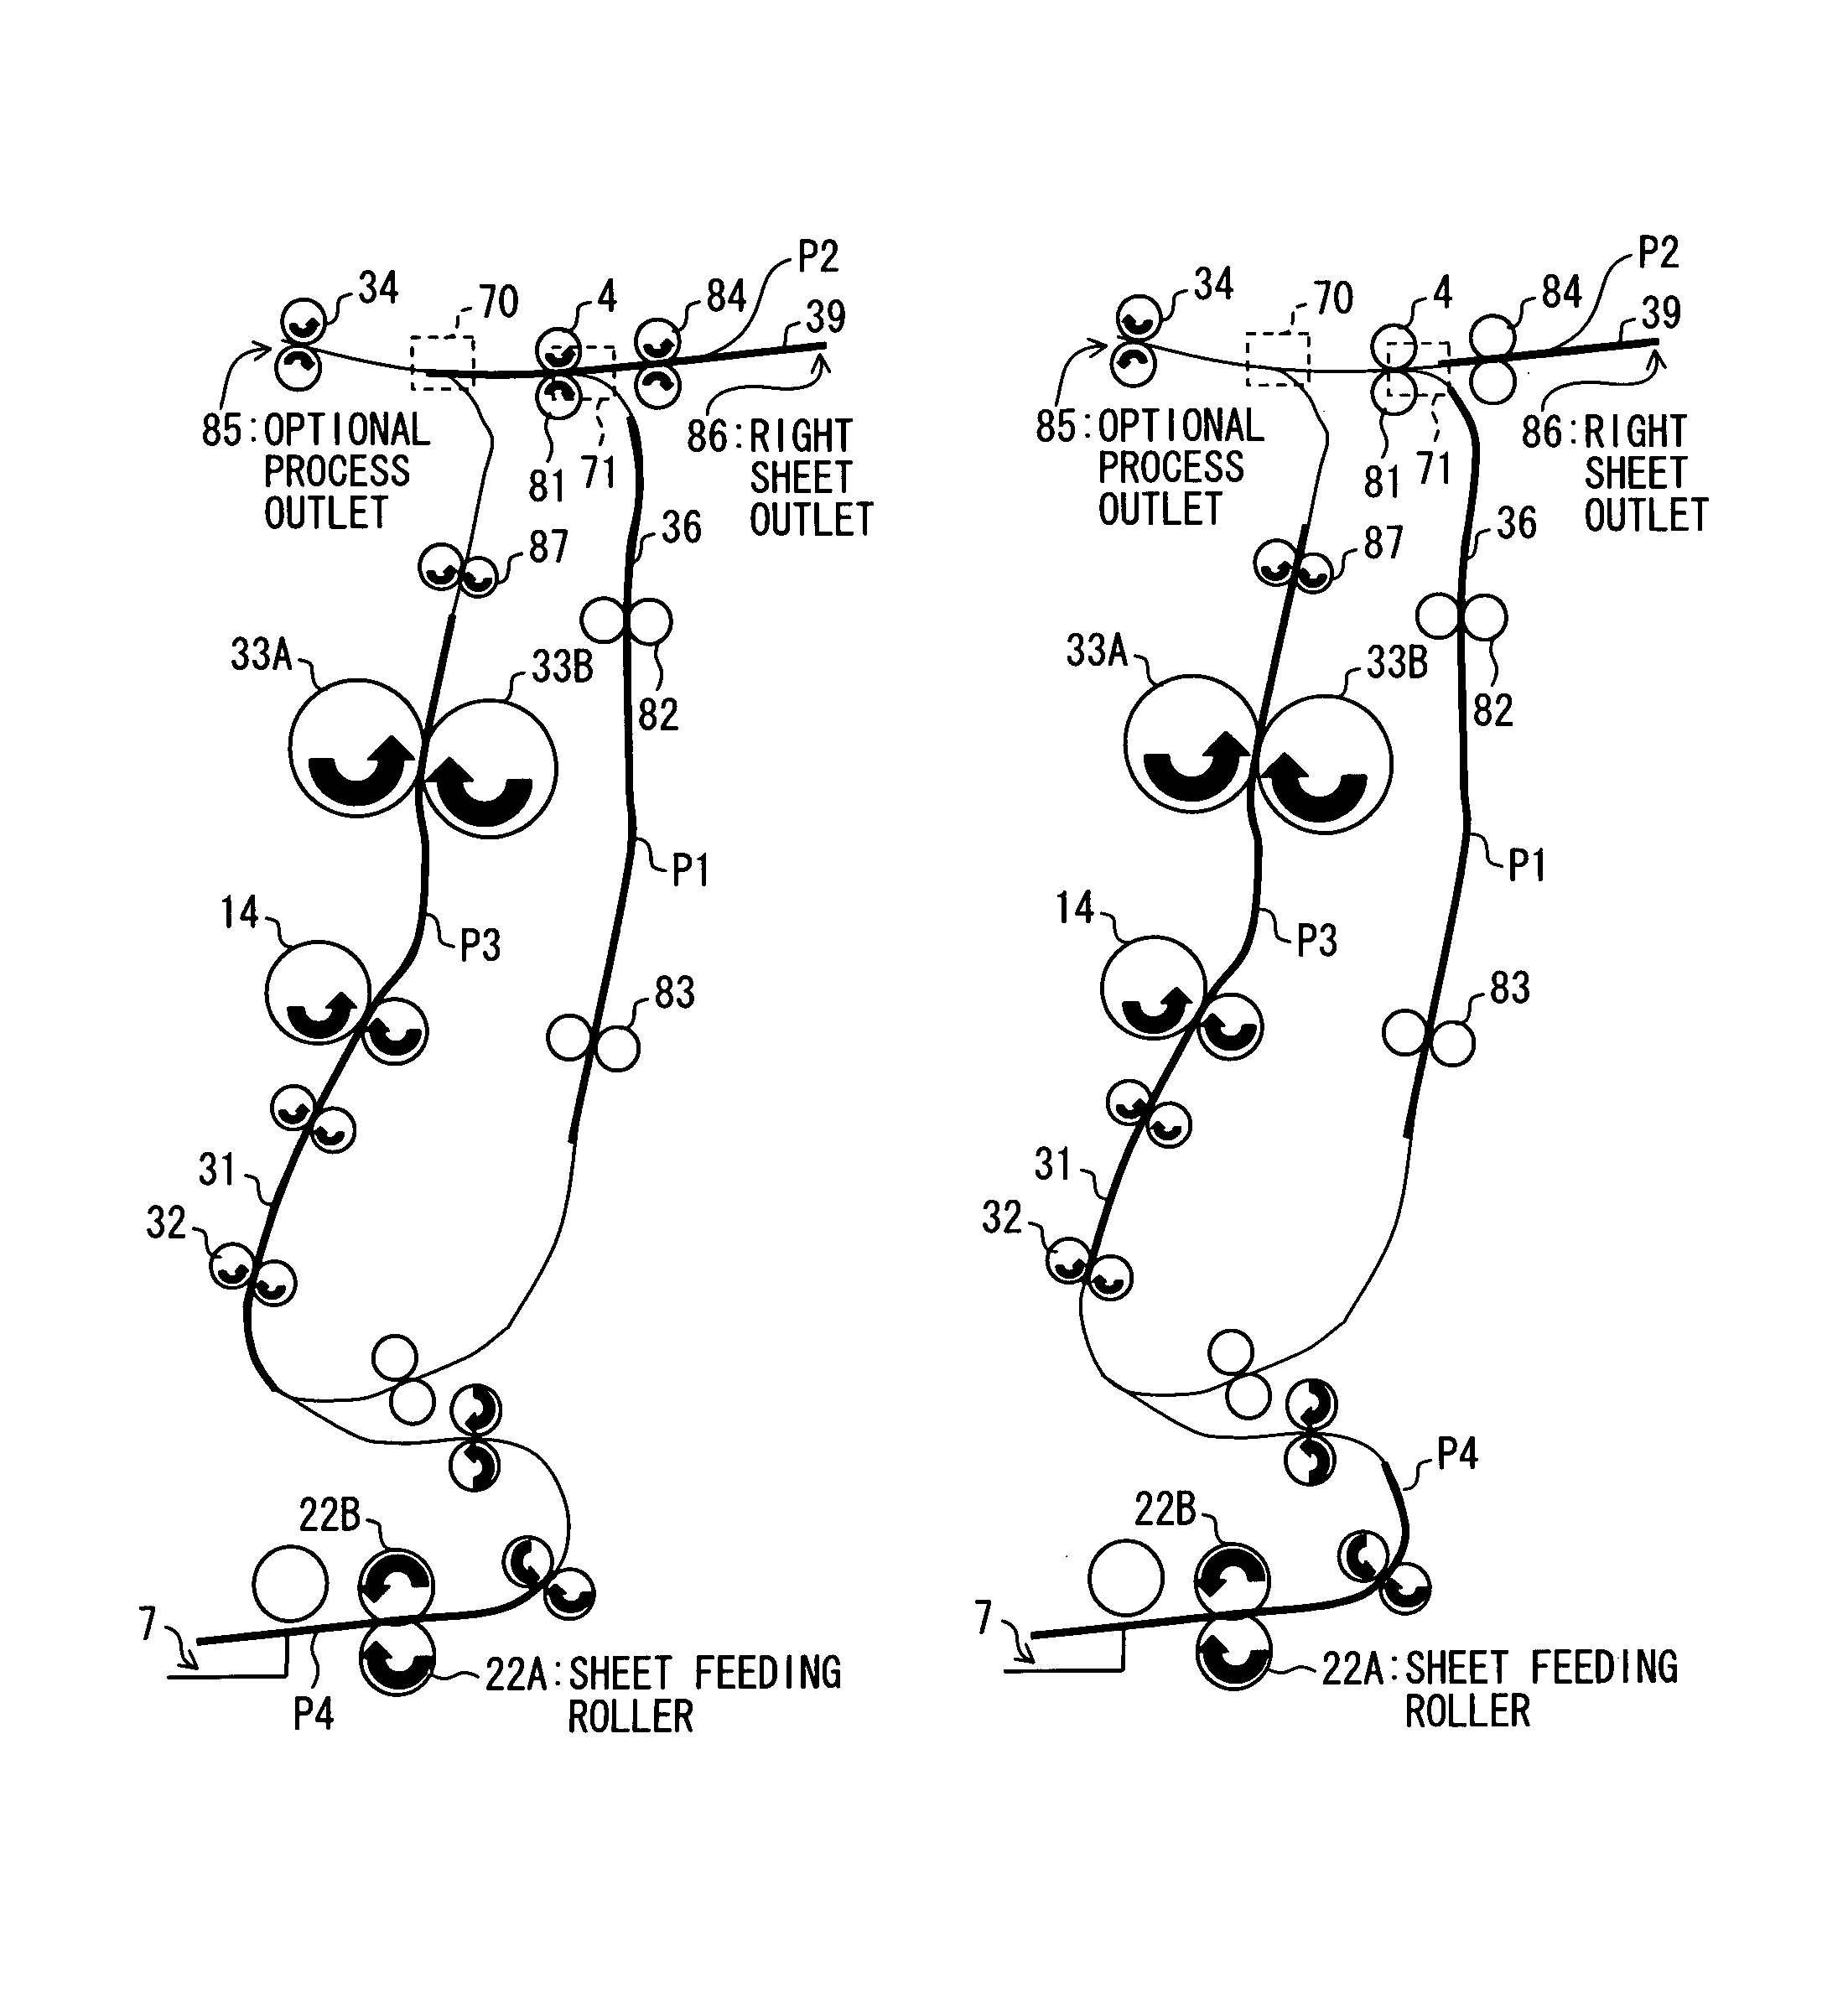 Image forming apparatus capable of discharging stacked sheets